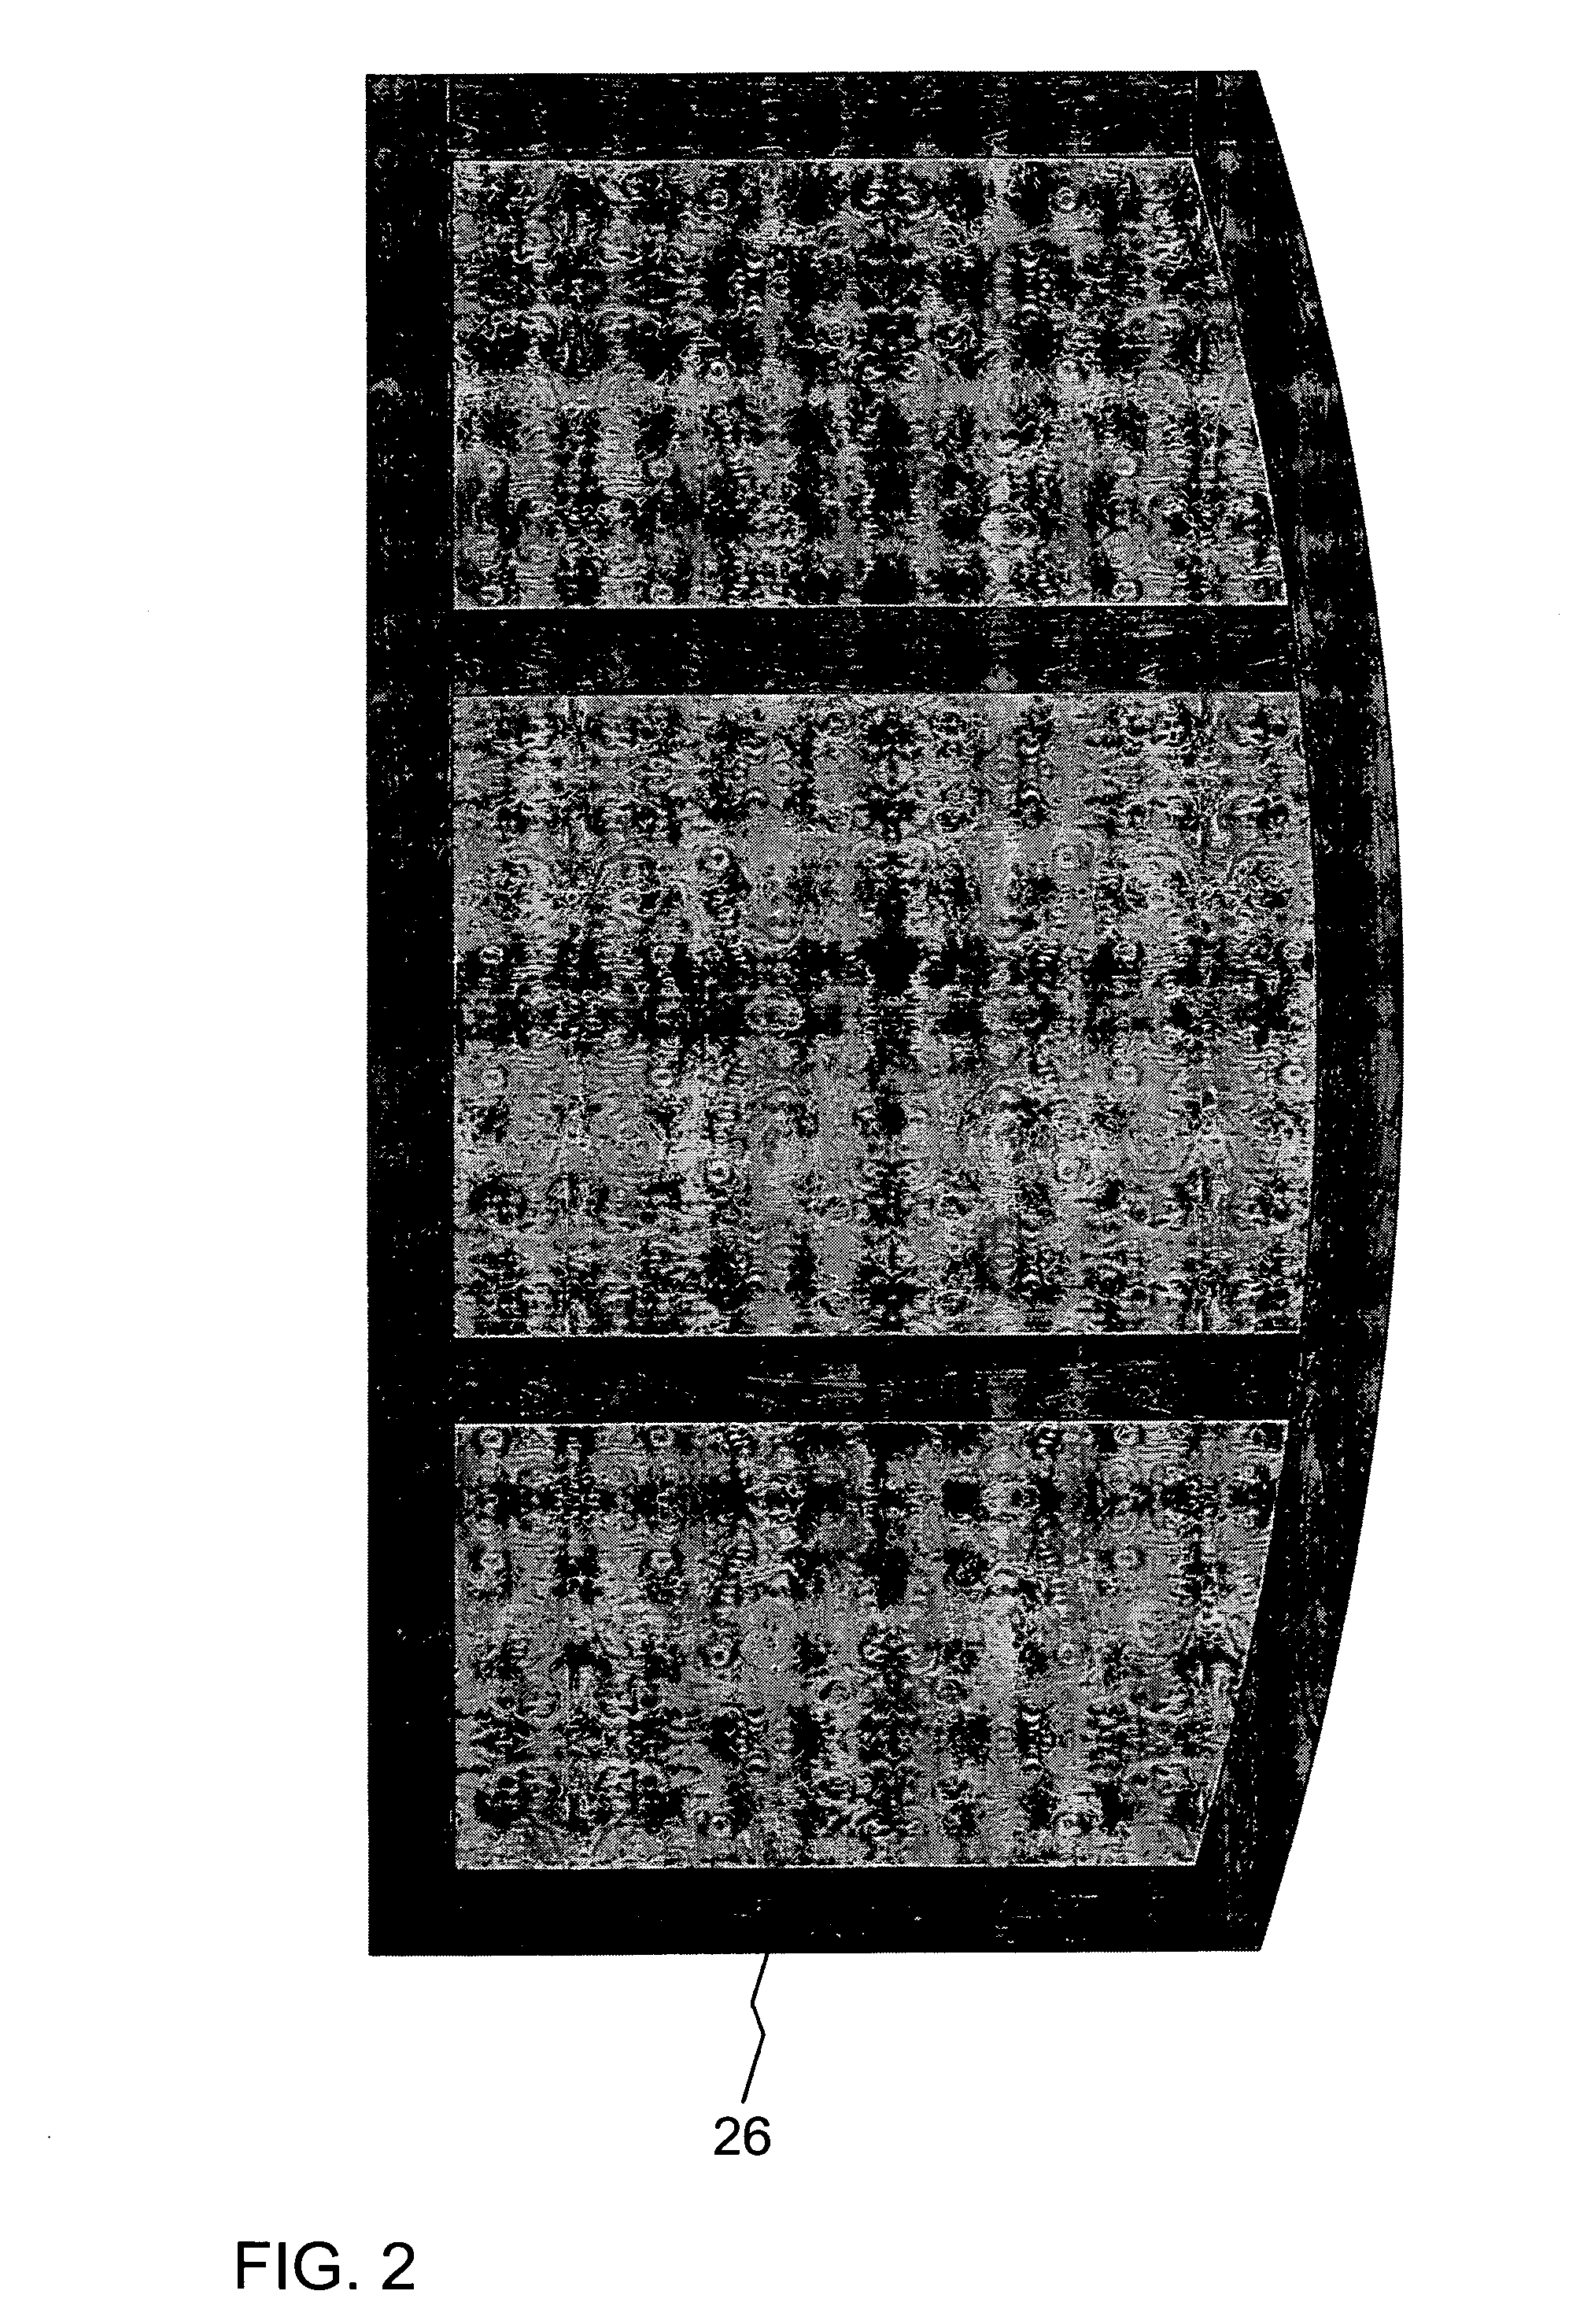 Digitally printed furniture and methods for manufacture thereof